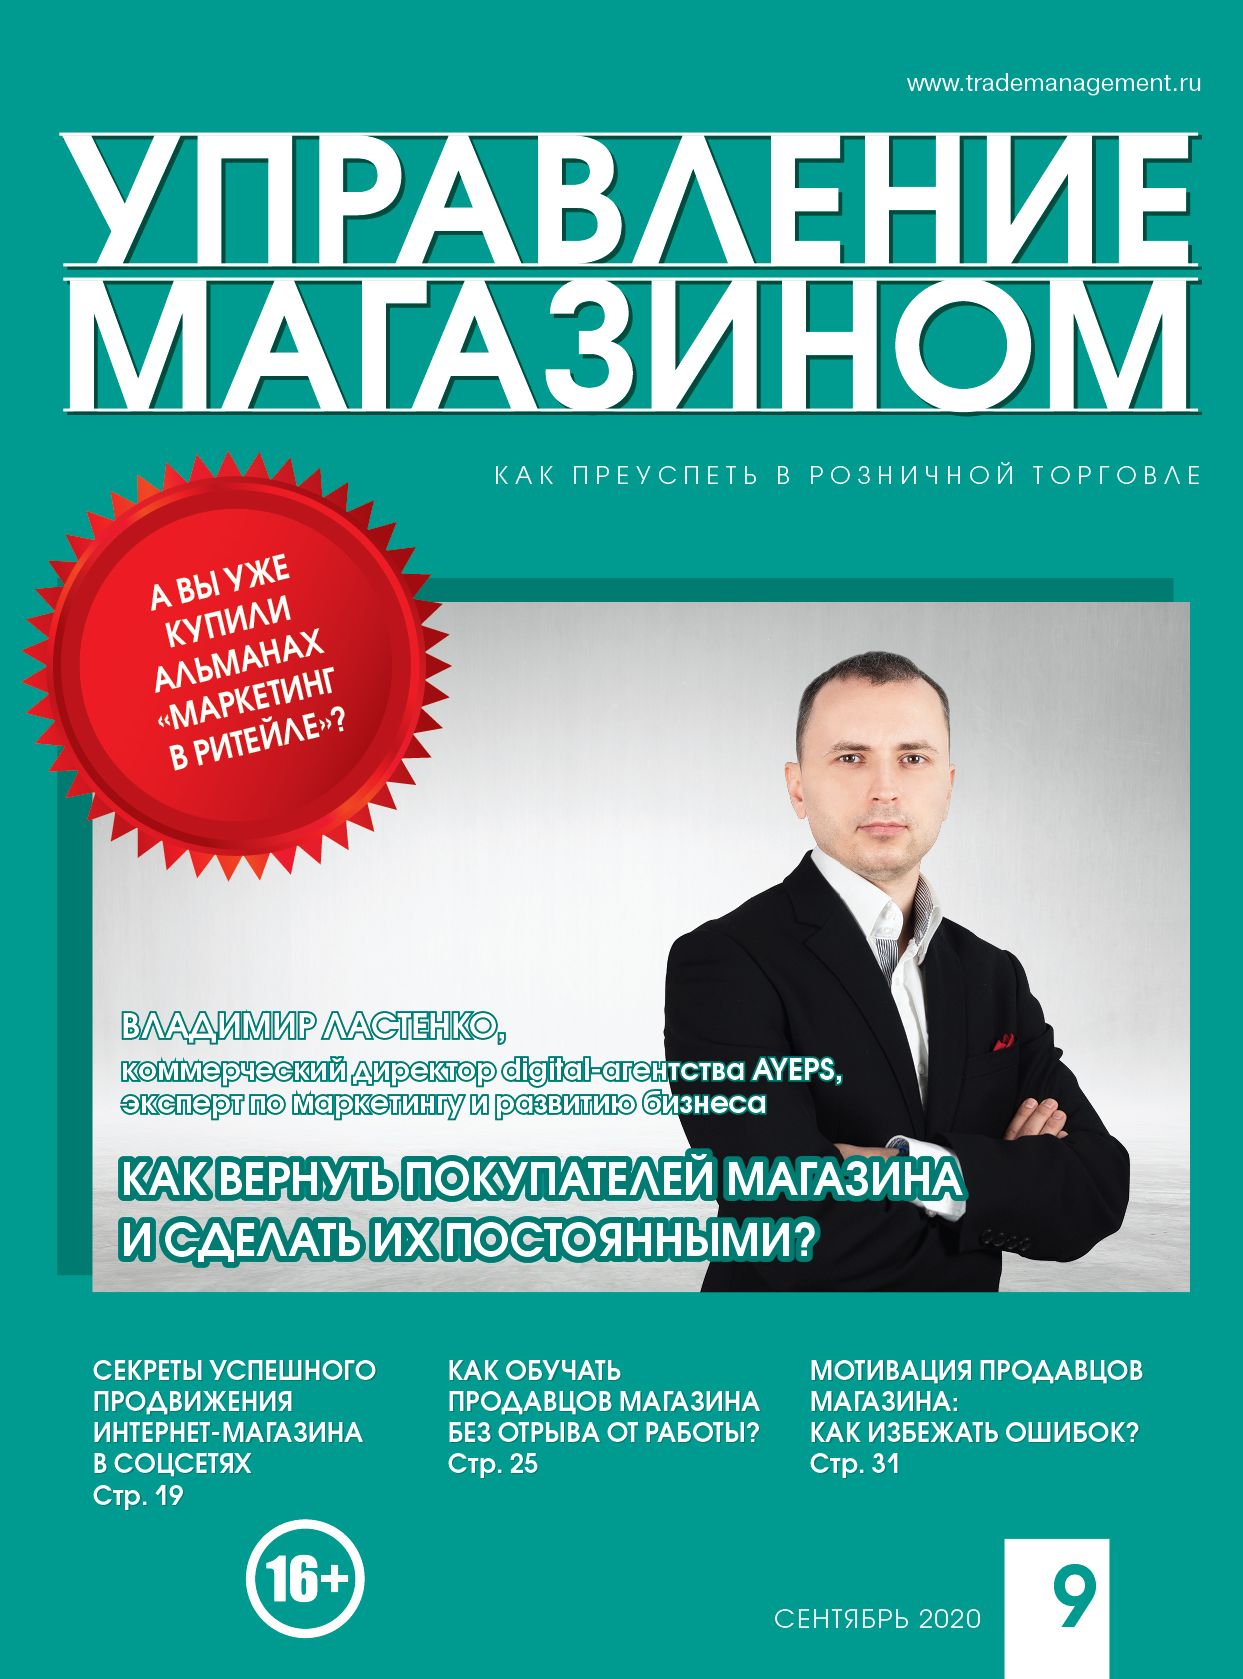 COVER УМ 9 2020 face web